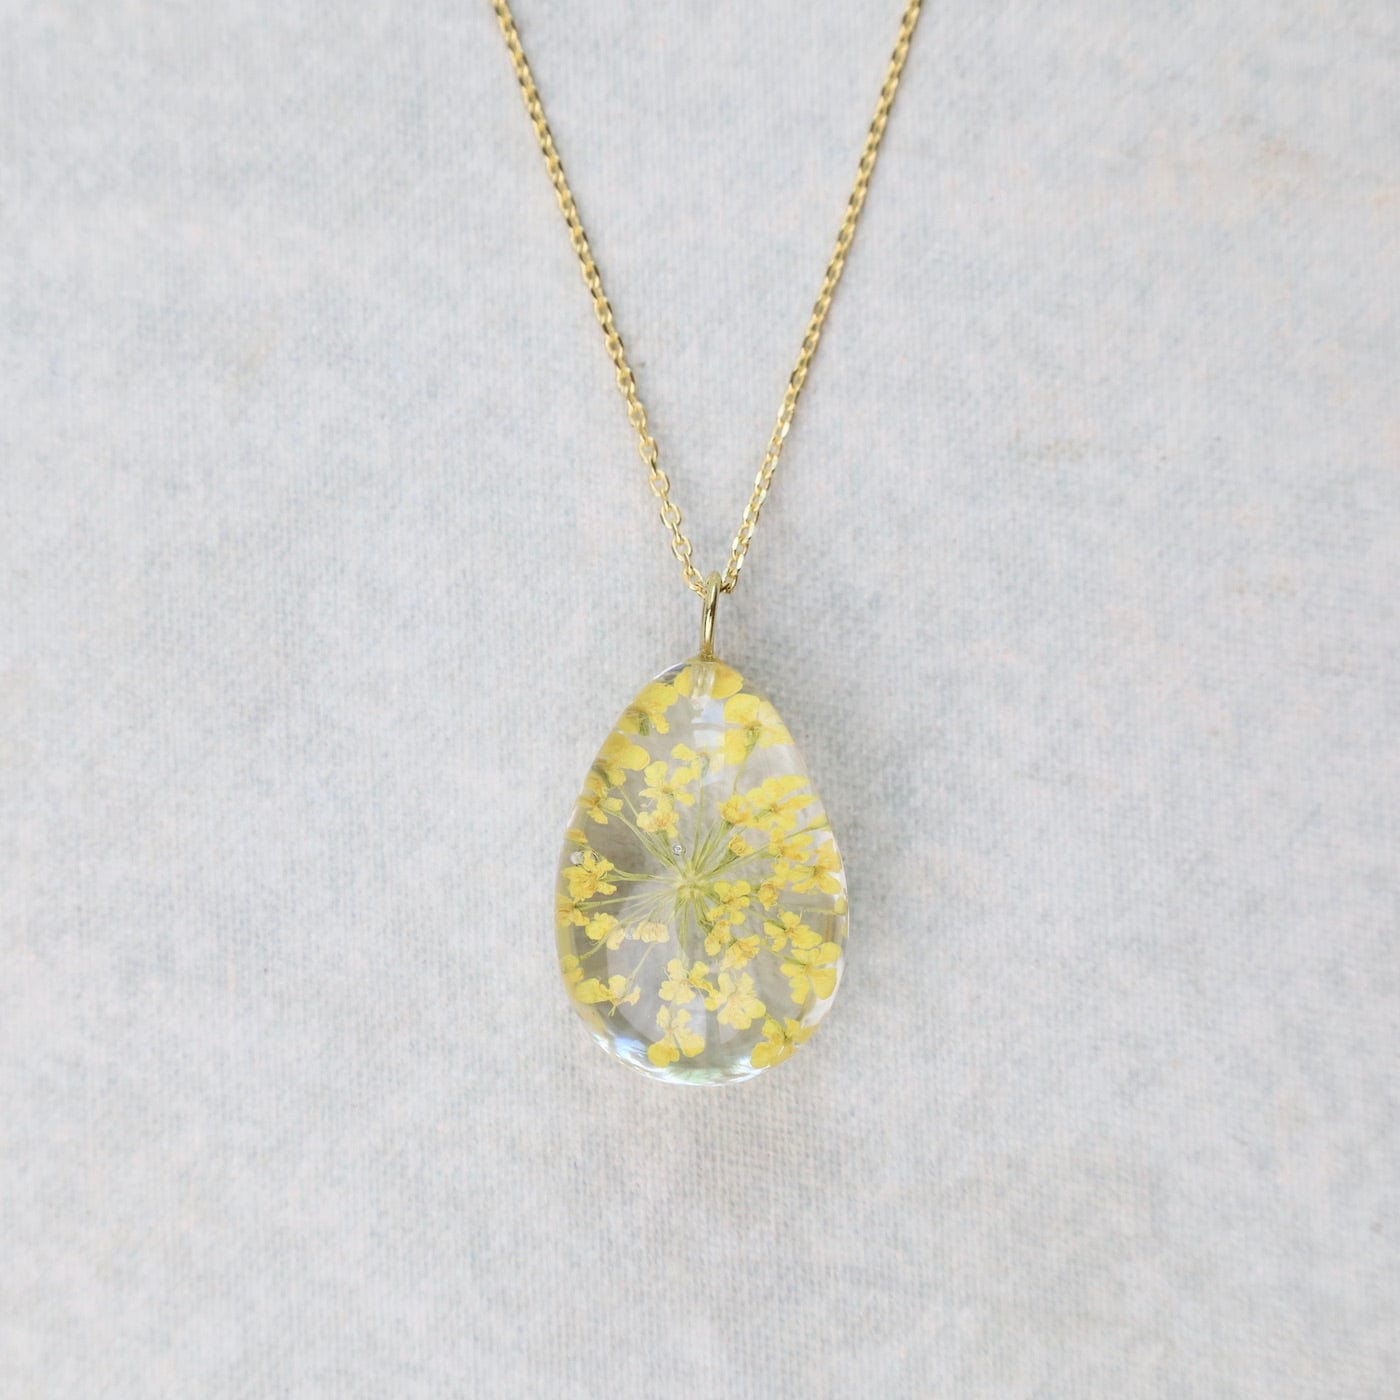 NKL-GPL Botanical Dew Drop Yellow Queen Anne Lace Necklace